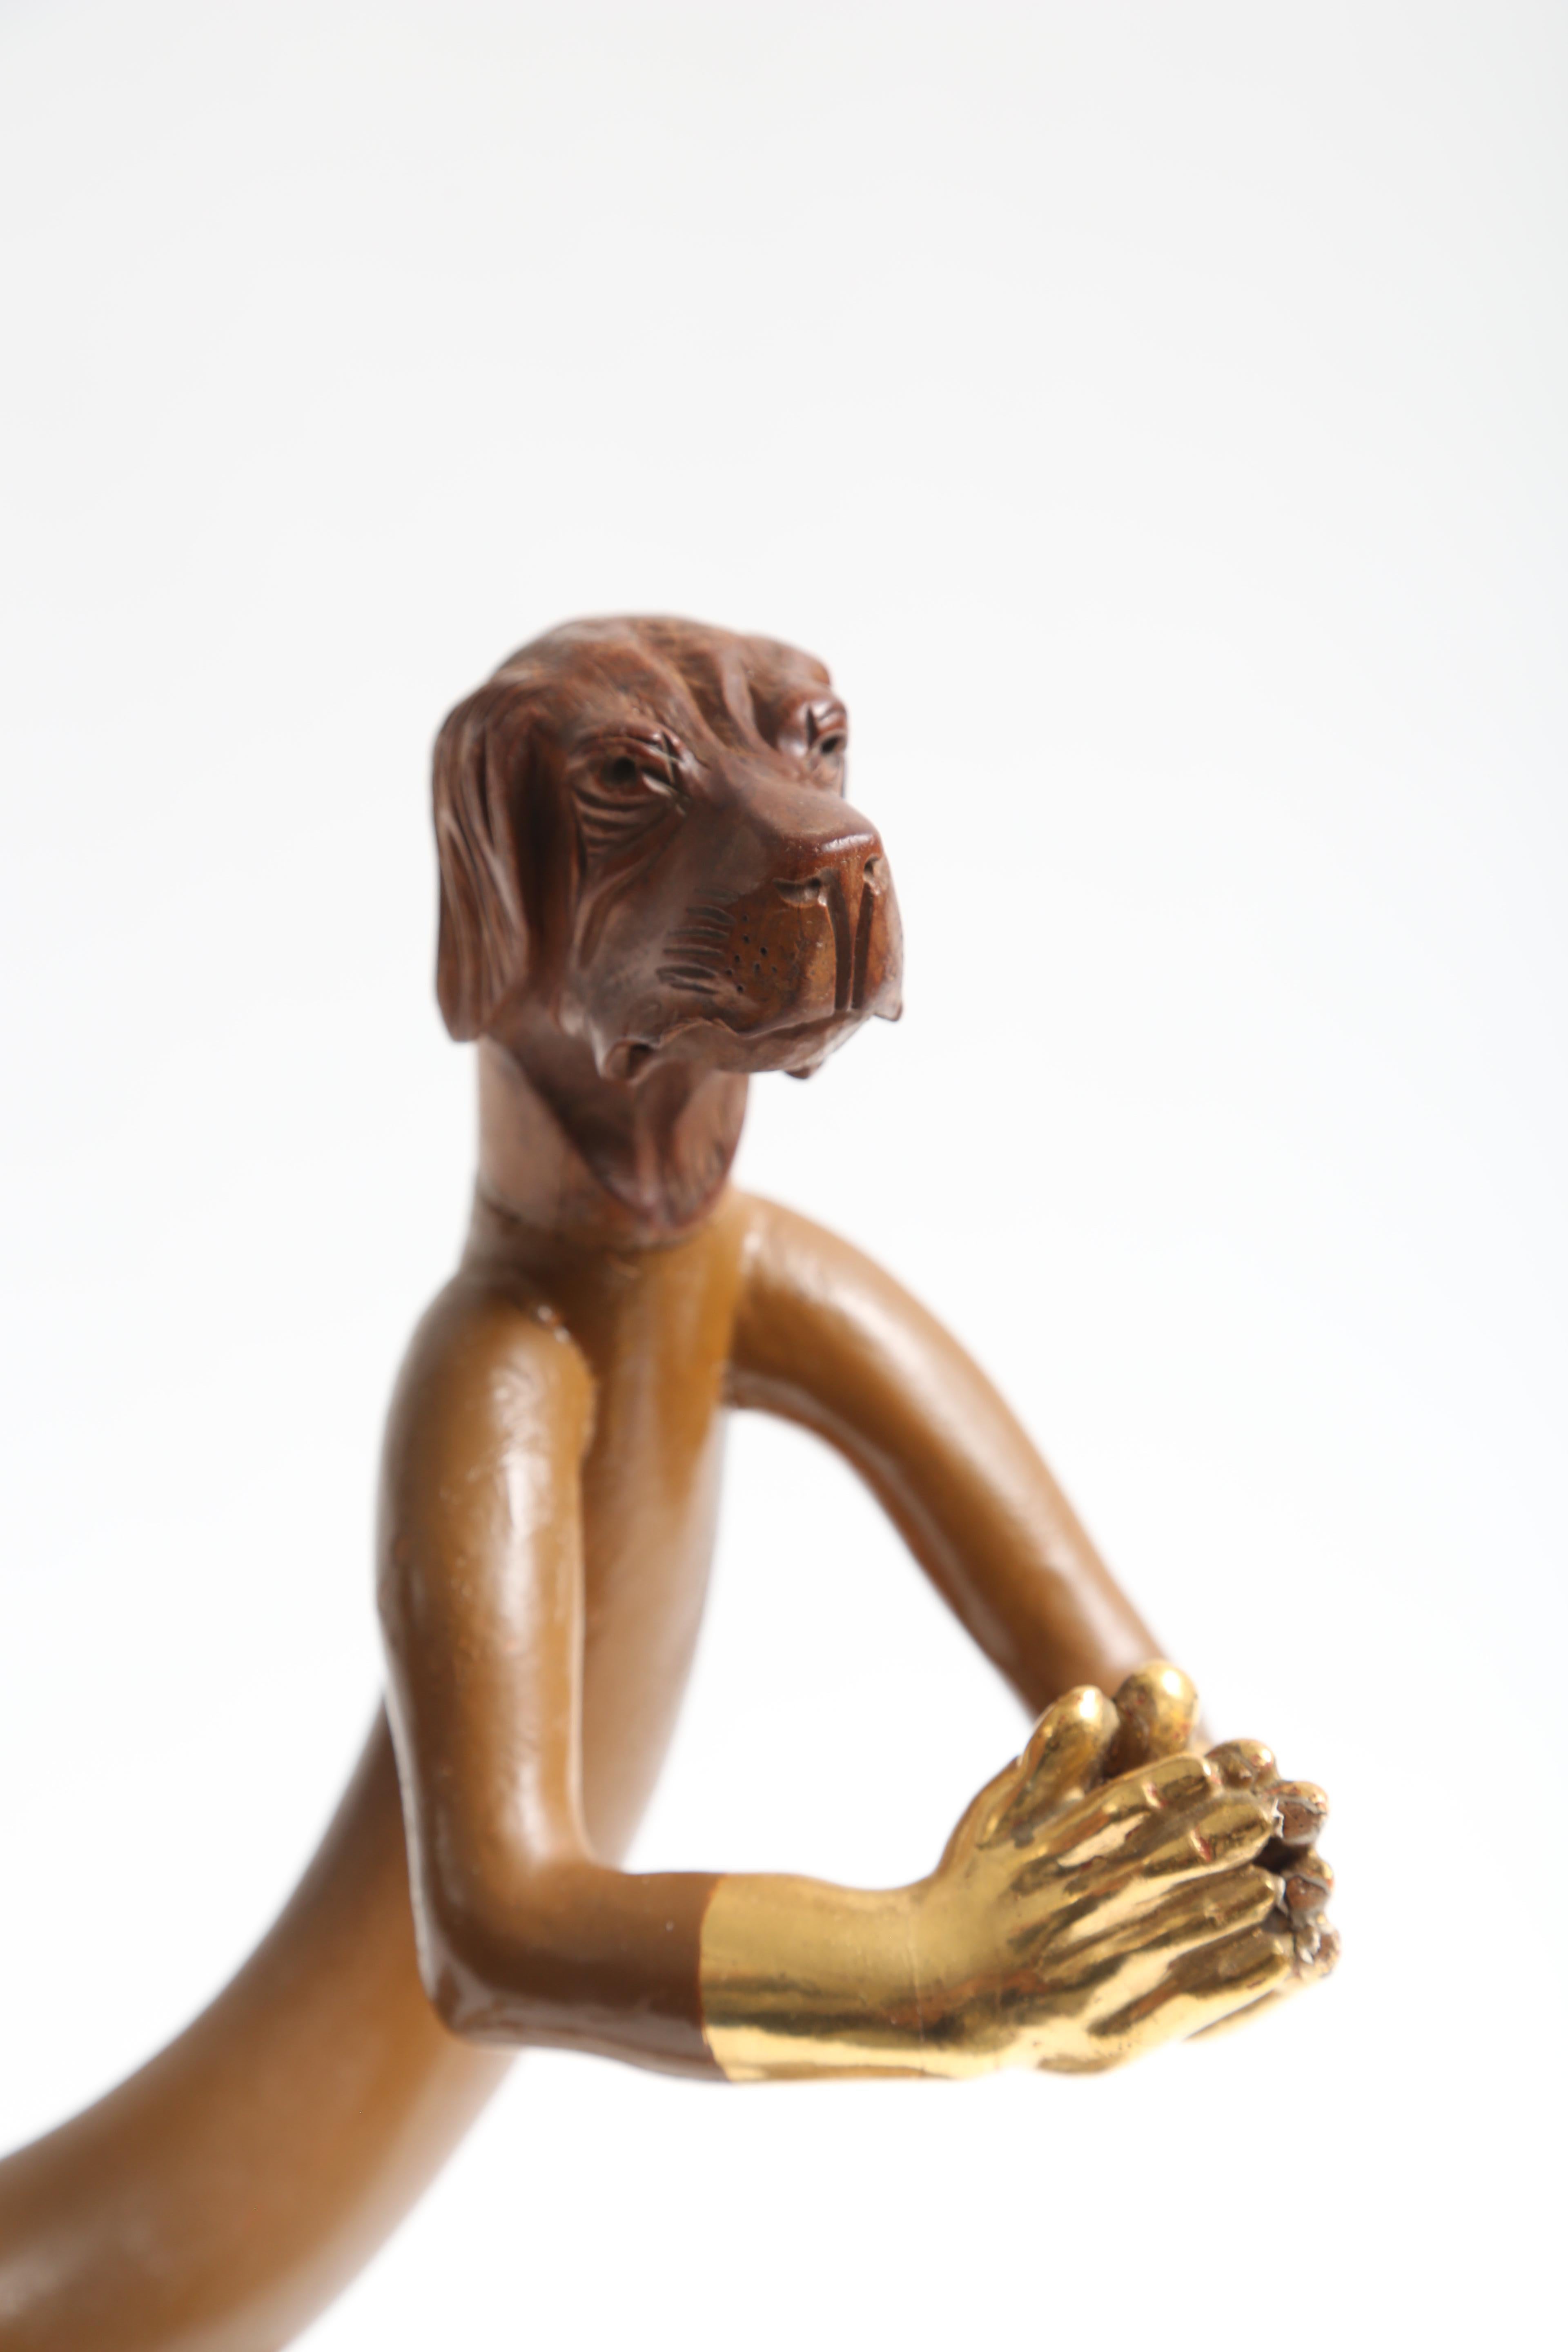 Mexican Pedro Friedeberg Sculpture Closed Hands For Sale